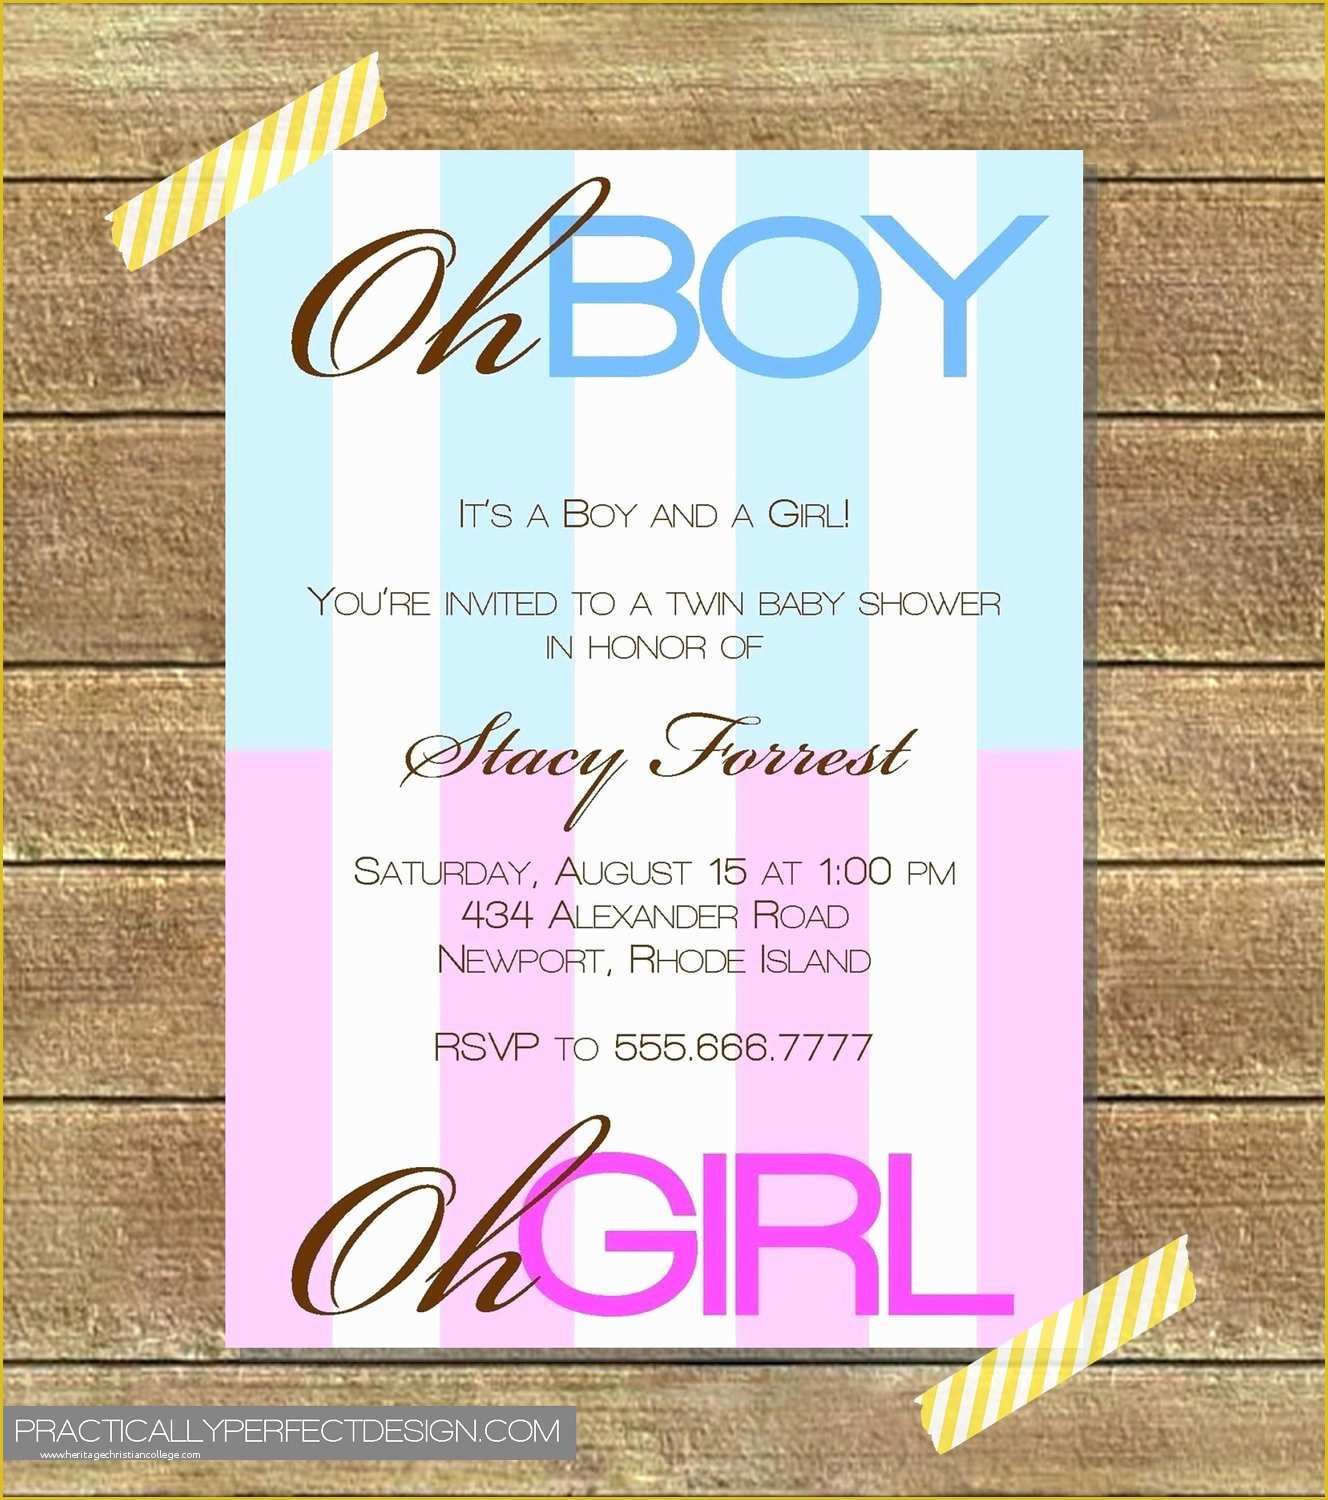 Twin Baby Shower Invitations Templates Free Of Twin Baby Shower Invitation Boy and Girl